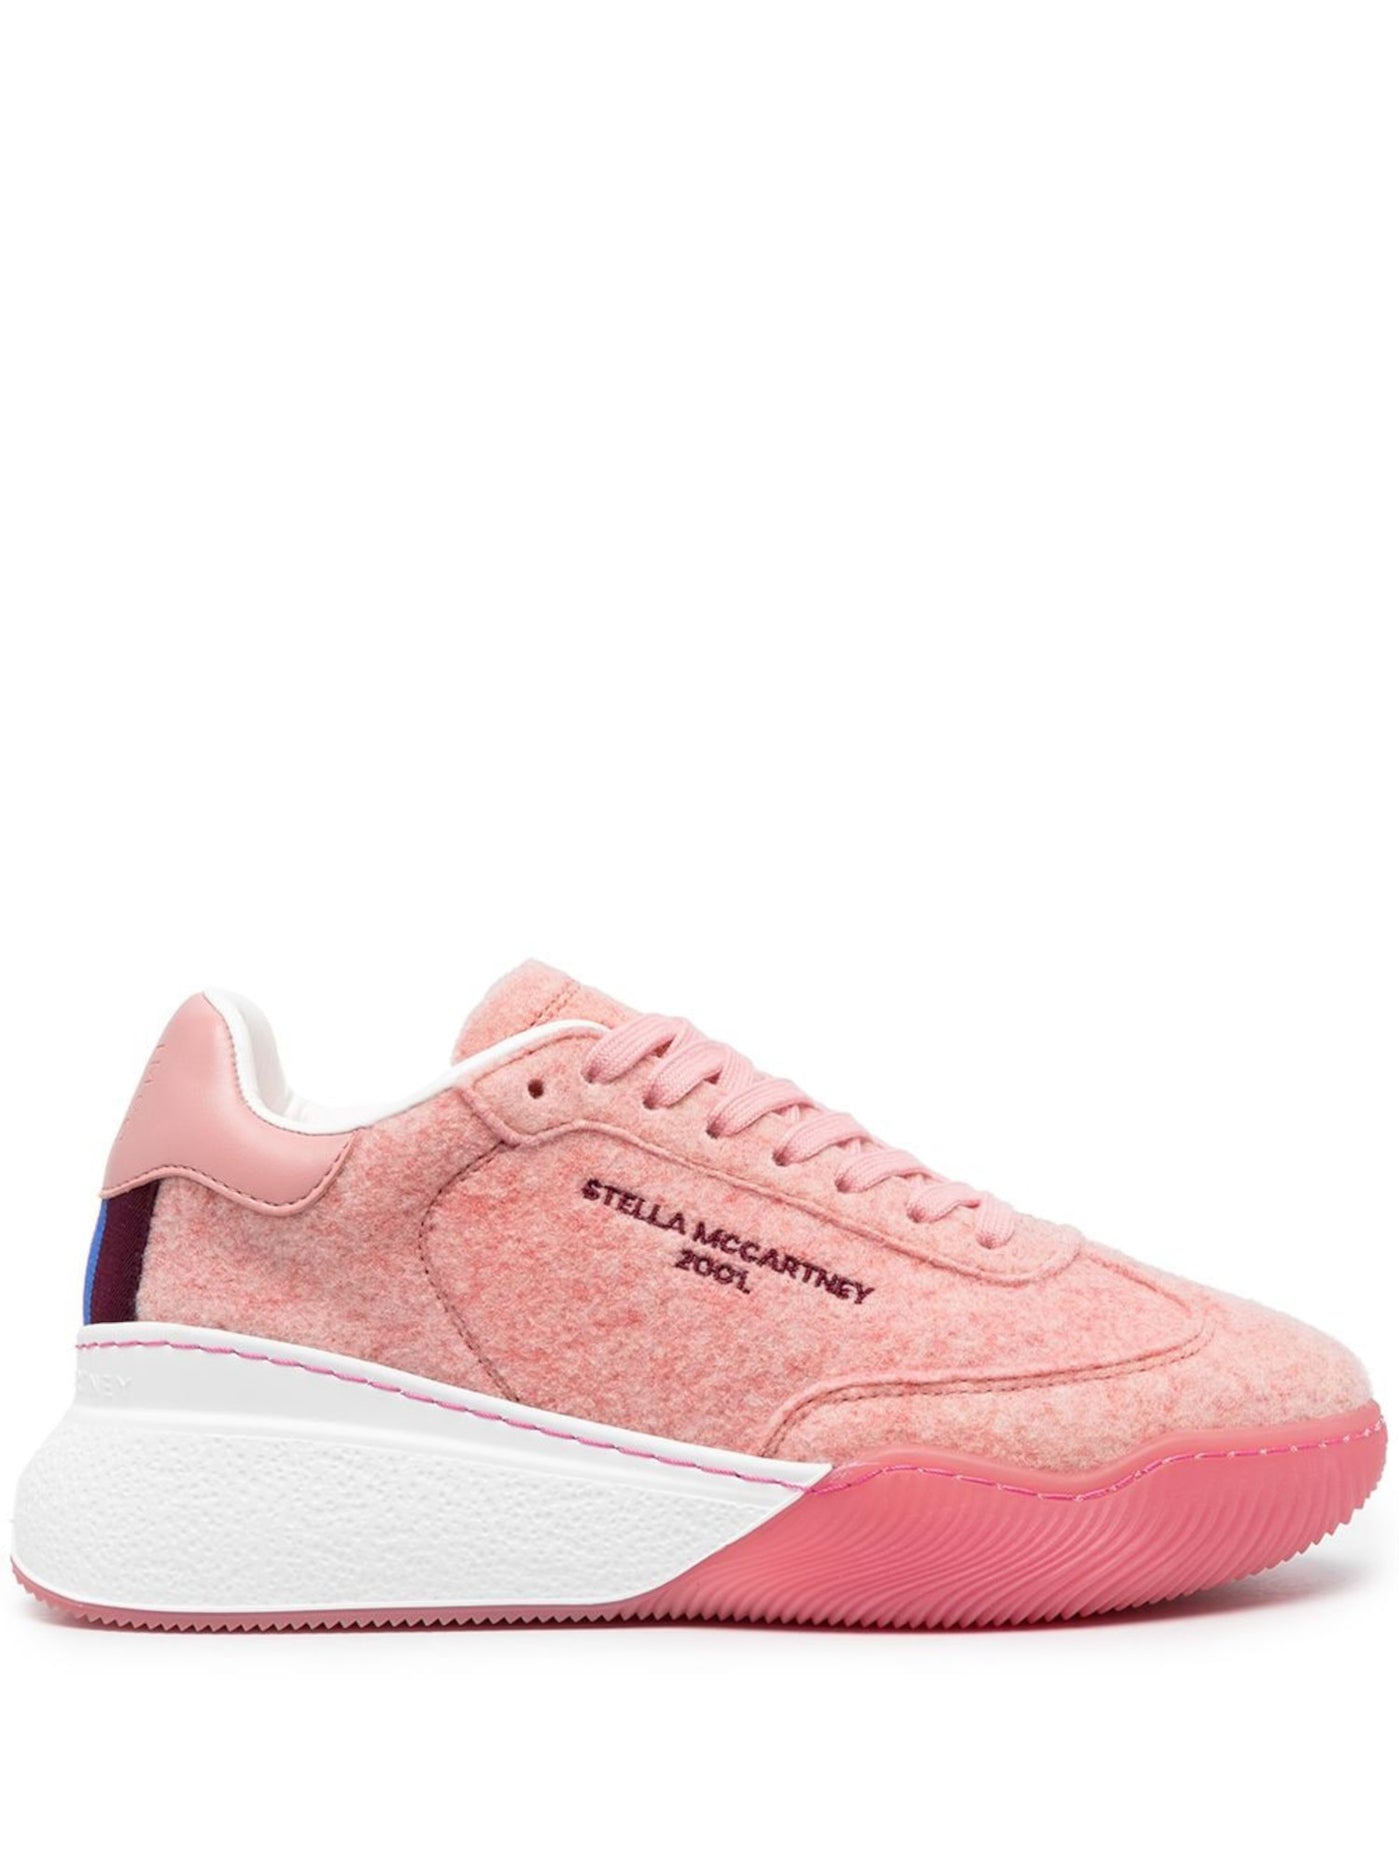 STELLAMCCARTNEY Womens Pink 1" Platform Felt Stripe Heel Accent Padded Logo Loop Round Toe Wedge Lace-Up Athletic Sneakers Shoes 36